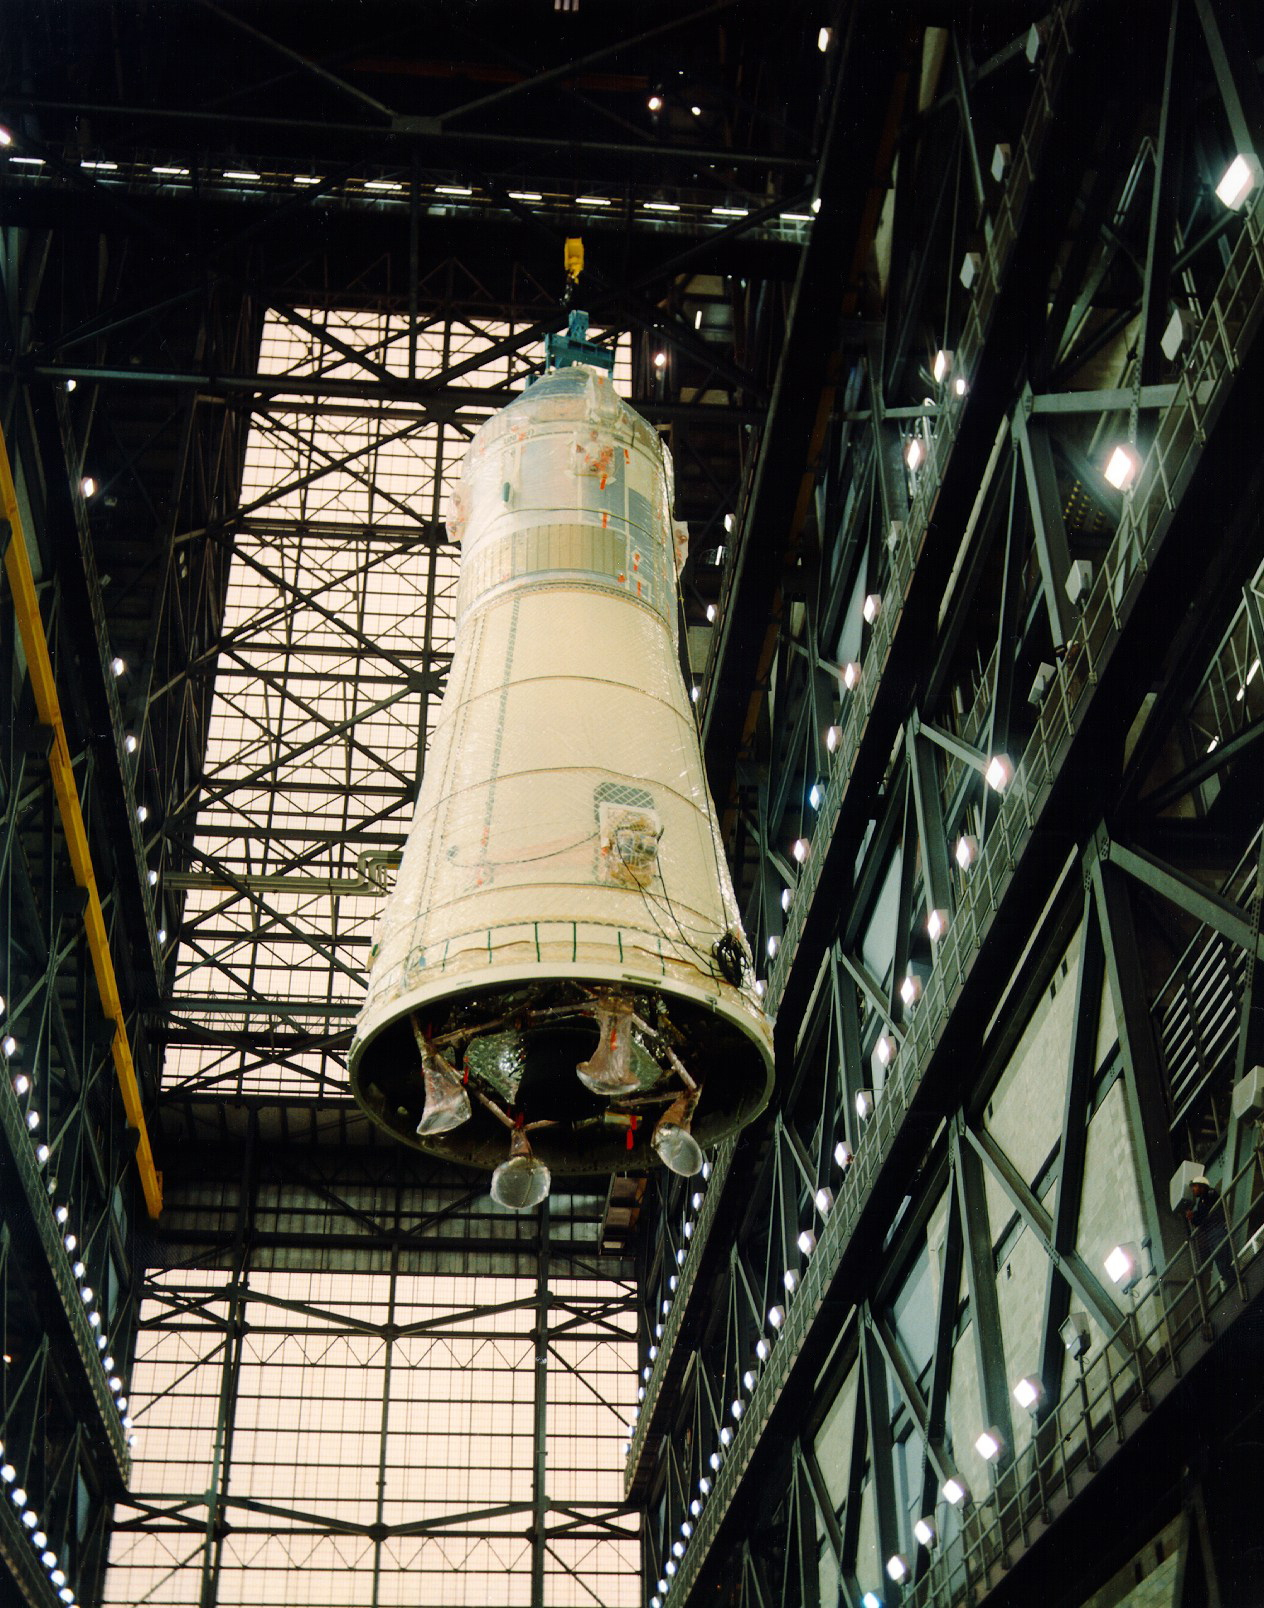 Workers lift the spacecraft for stacking onto the rocket, the footpads of the LM's folded landing gear visible